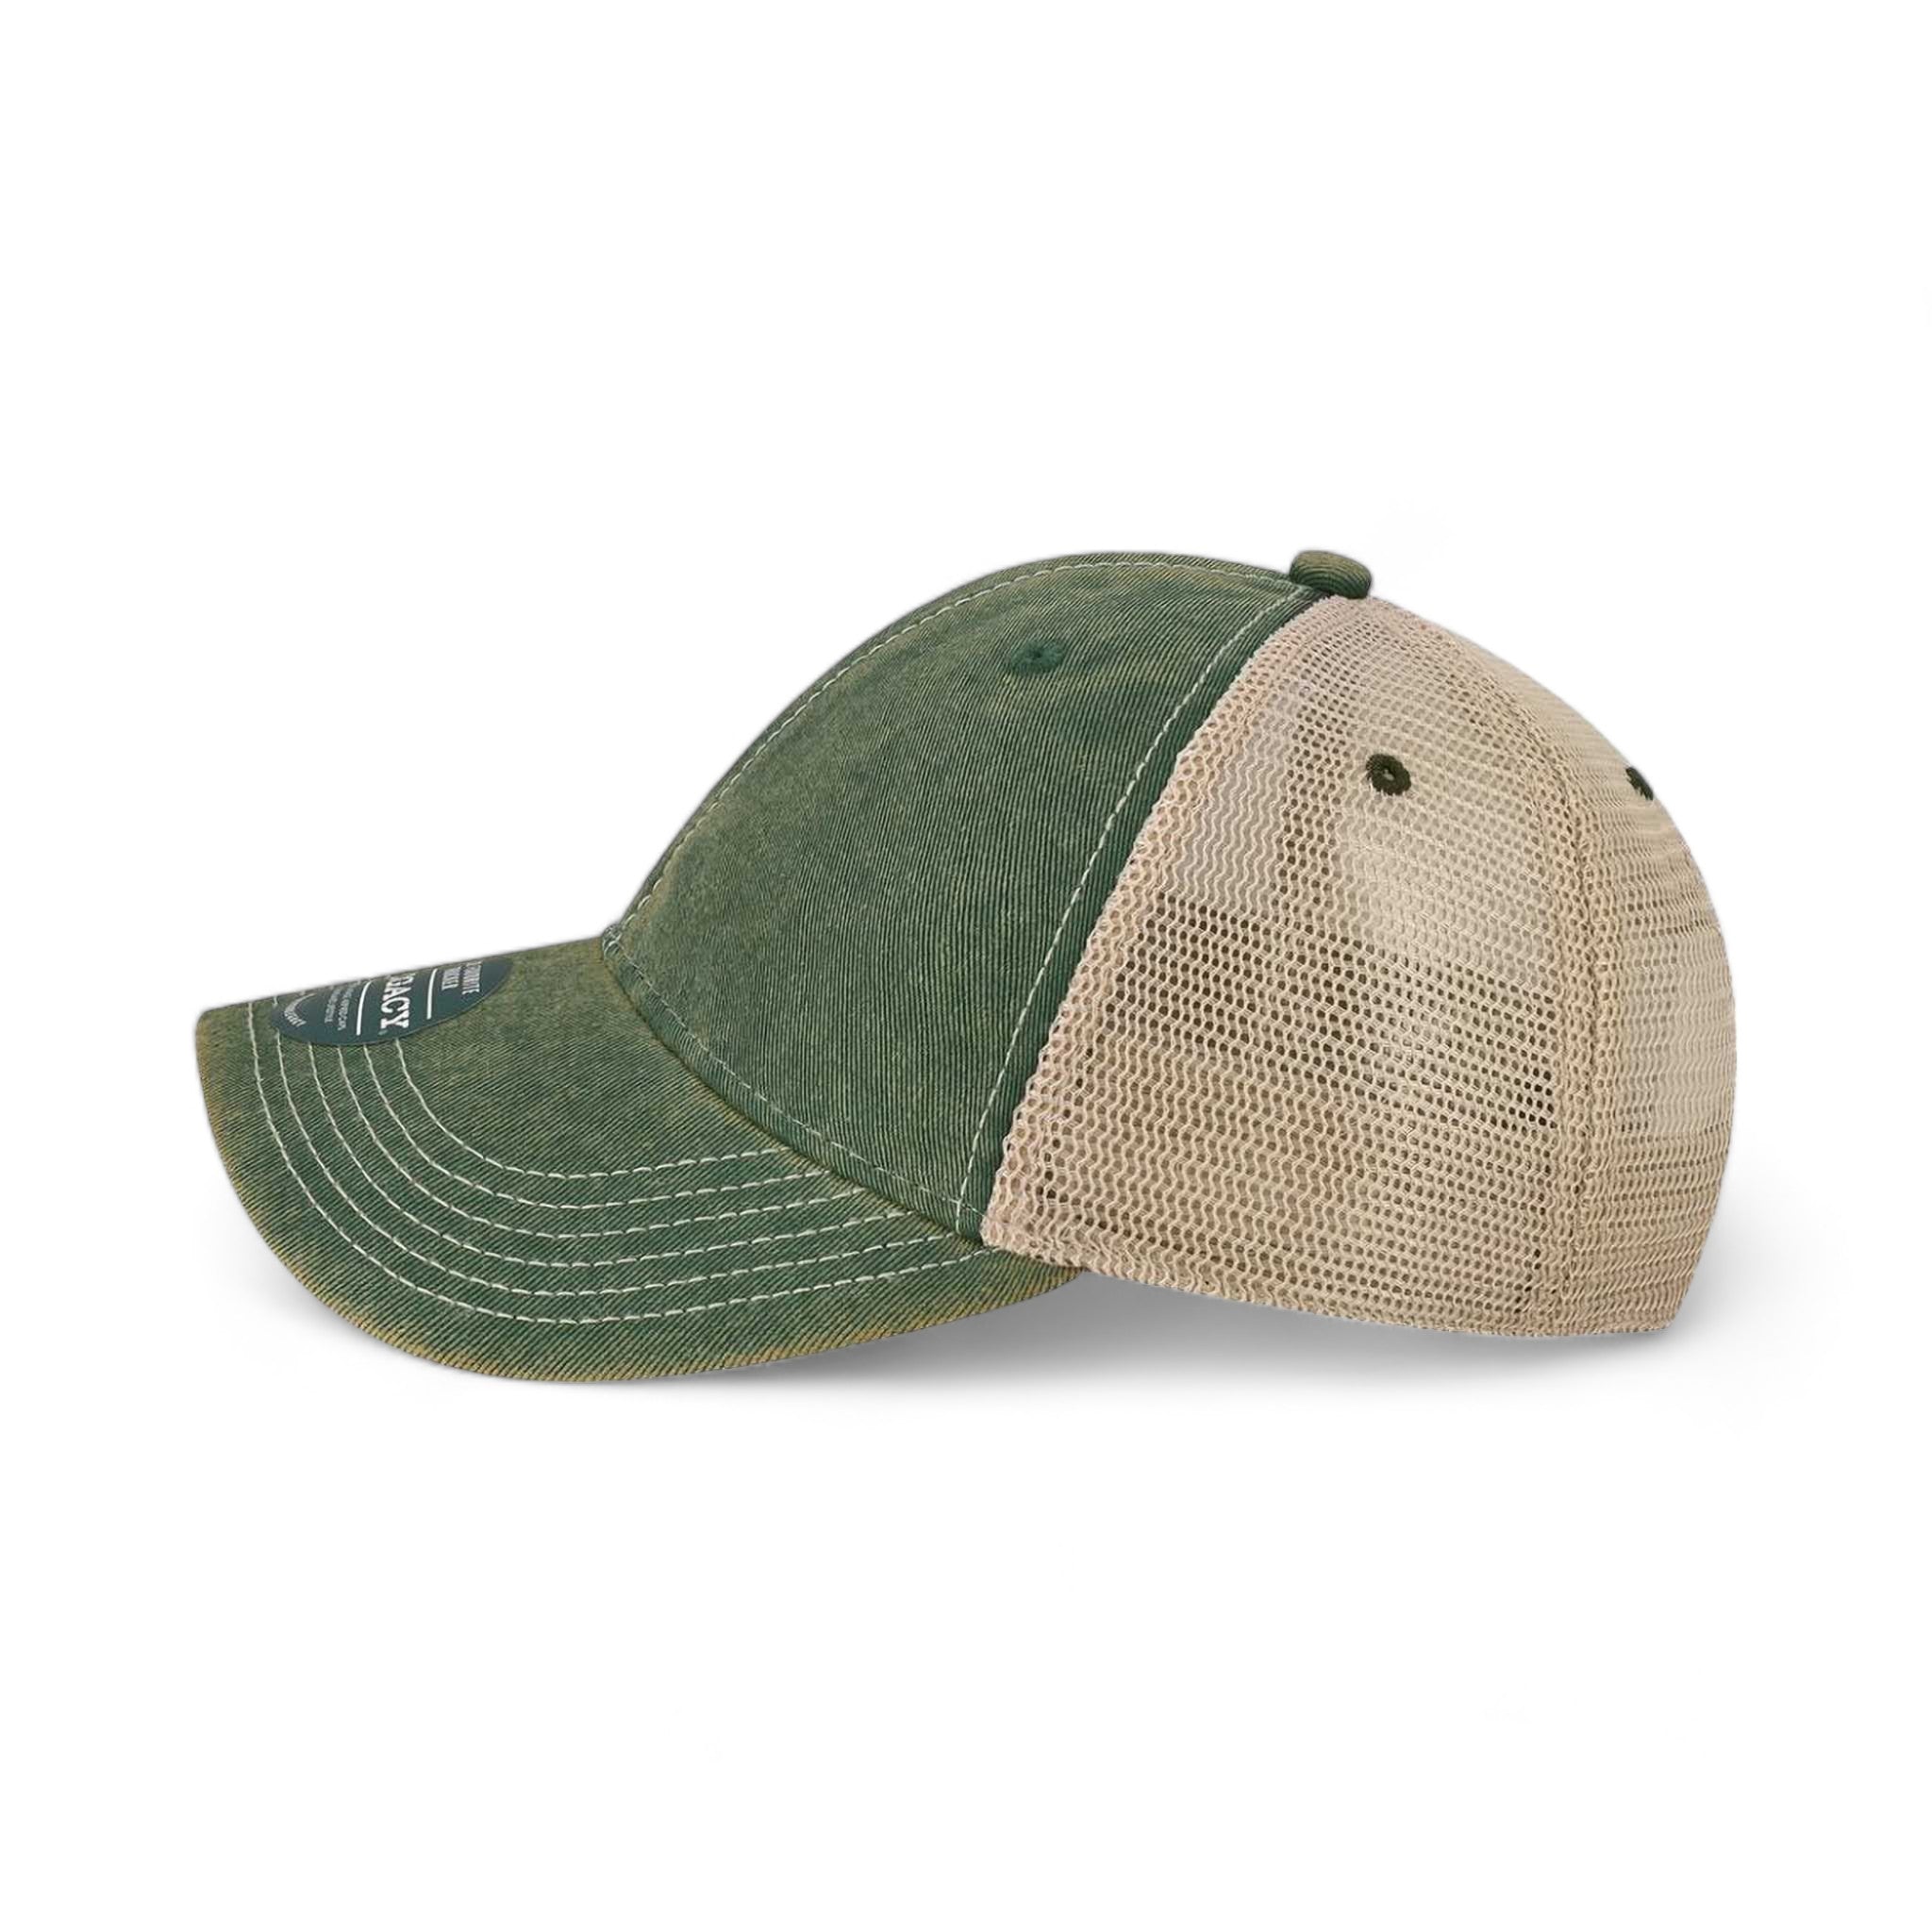 Side view of LEGACY OFAY custom hat in dark green and khaki